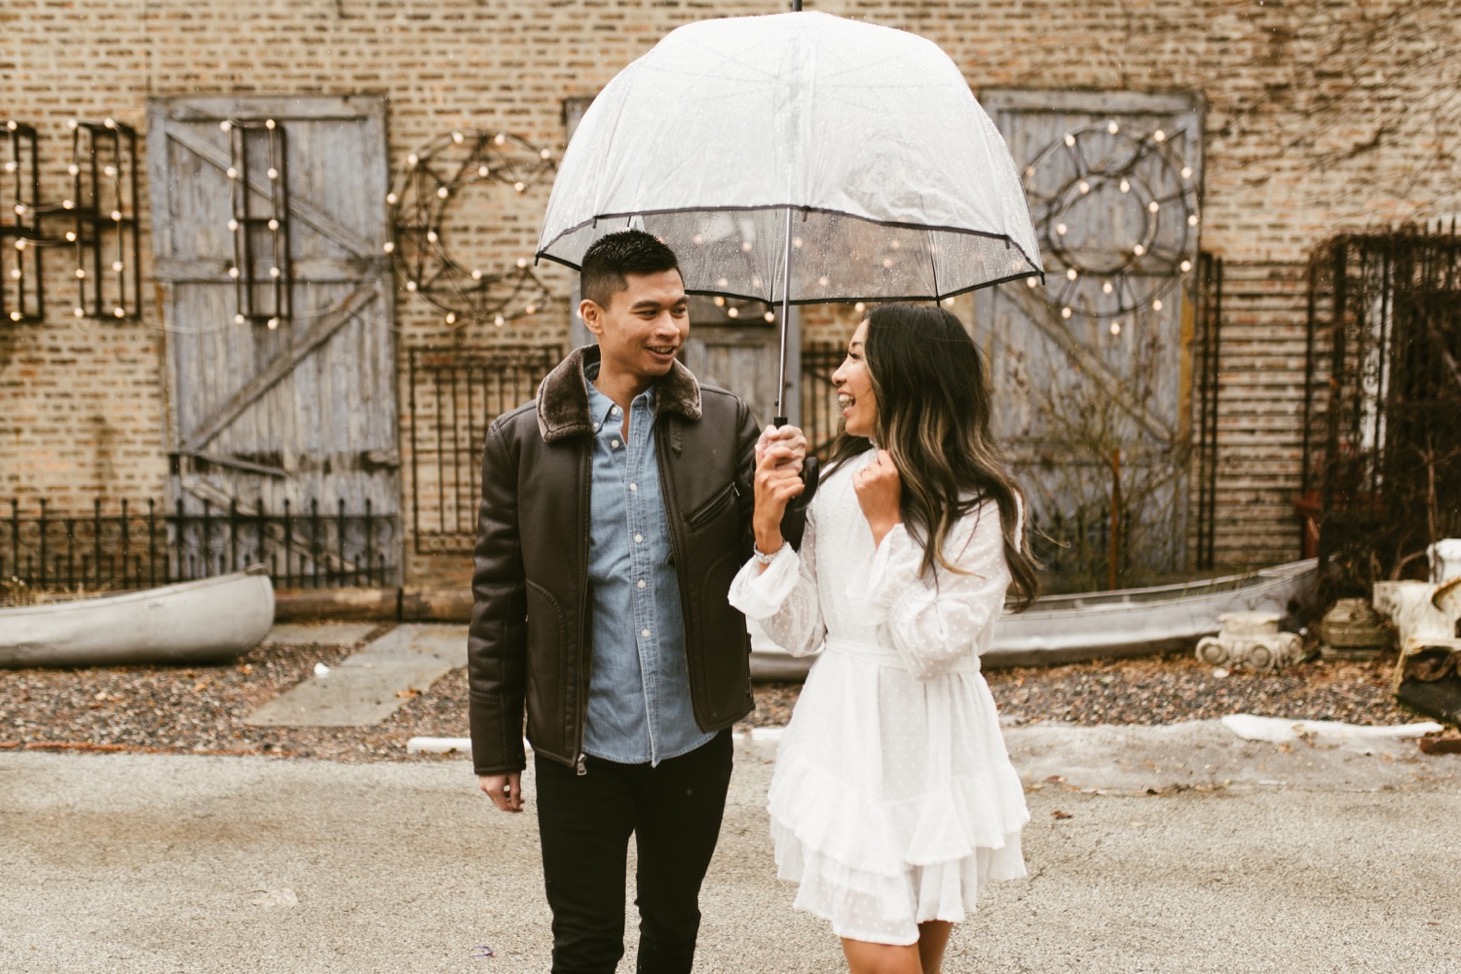 Indigo Lace Collective, Chicago Wedding Photographer, Chicago Photographer, Engagement Session, Salvage One Chicago, What to Wear for an Engagement Session, Best Engagement Session in Chicago, Indoor Engagement Session Location in Chicago, Illinois Wedding Photographer, Chicago Engagement Photographer, Industrial Engagement Session, Industrial Wedding Venue, Industrial Chicago Wedding Venue, Salvage One Wedding, Salvage One Engagement, Moody Engagement Session, Rainy Day Engagement Session